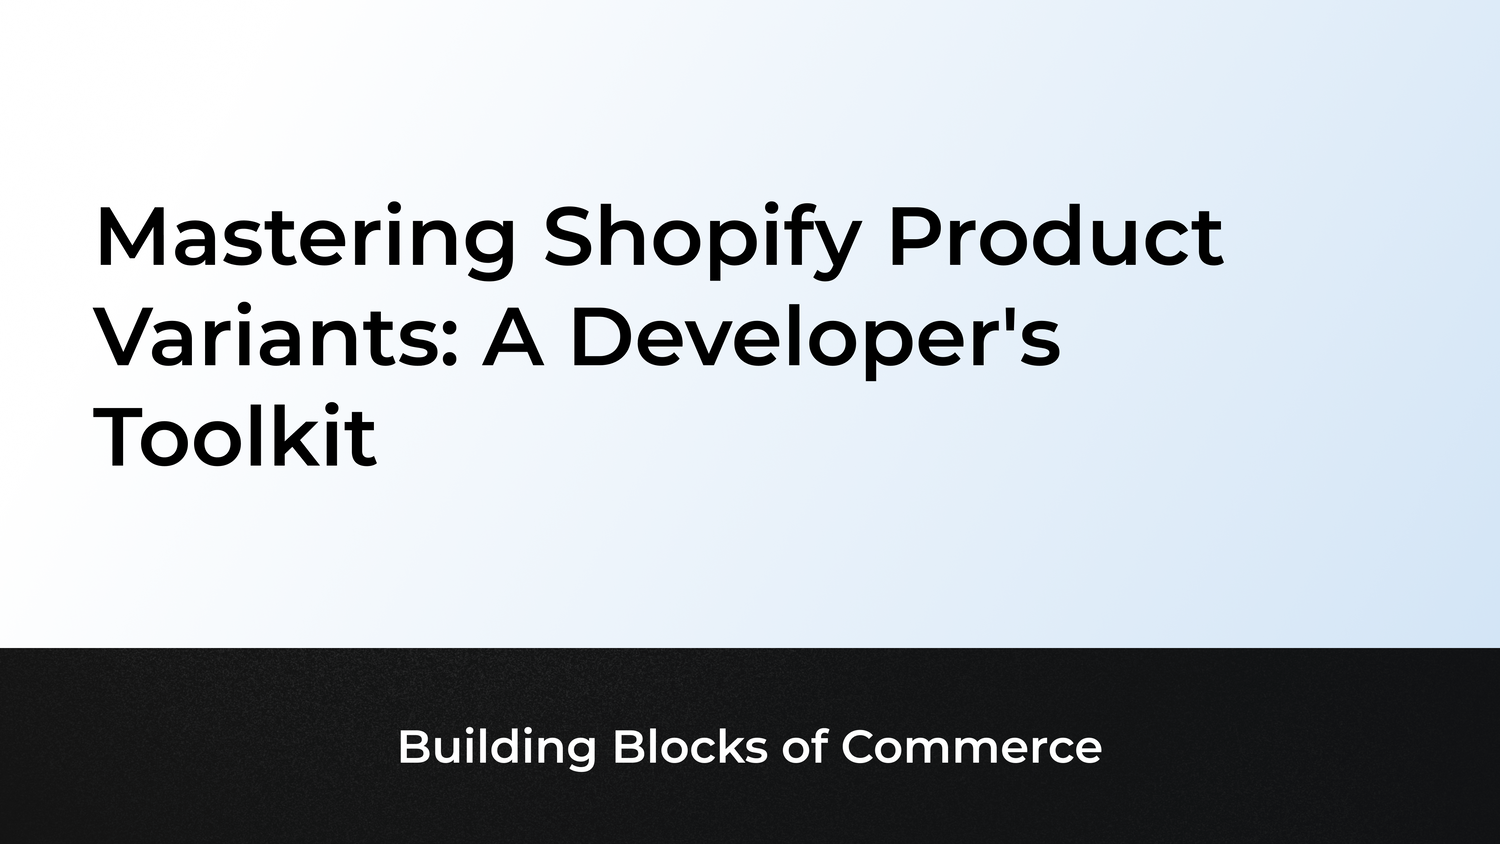 Mastering Shopify Product Variants: A Developer's Toolkit